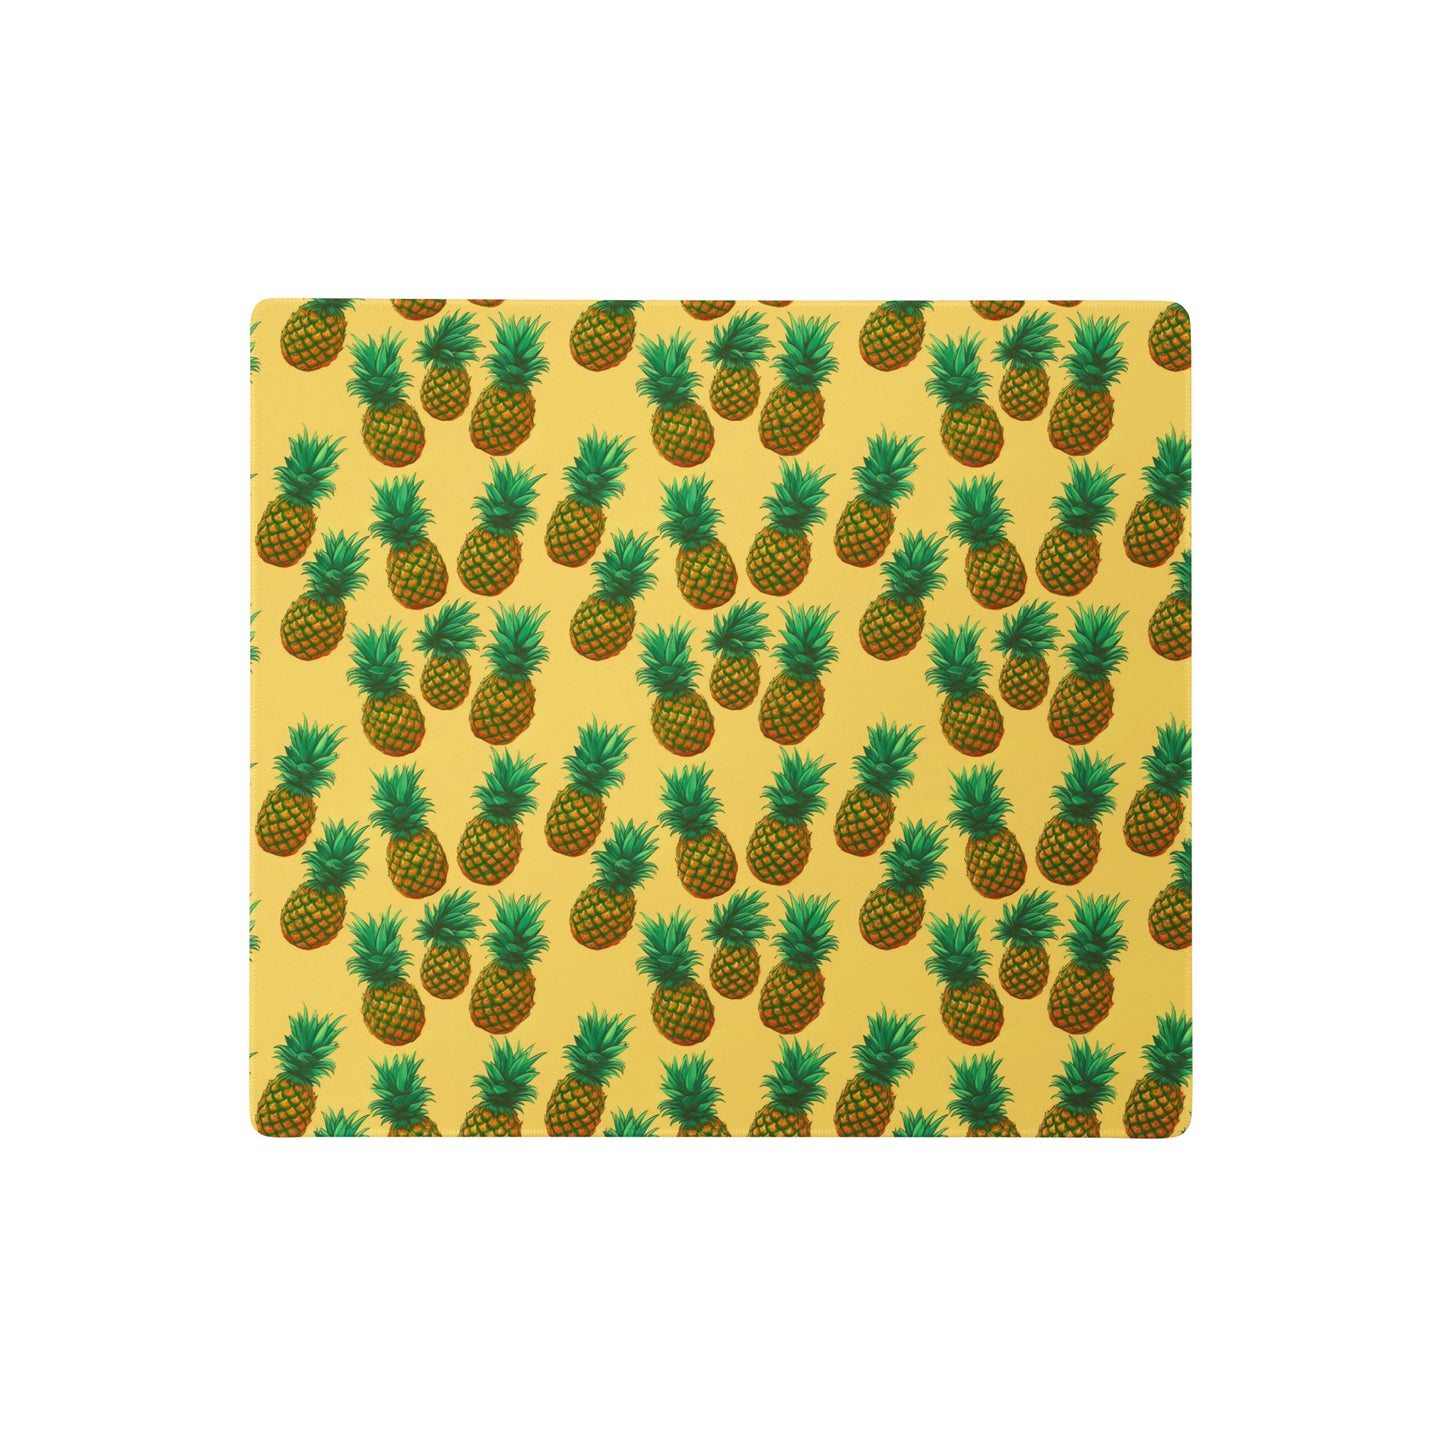 A 18" x 16" desk pad with pineapples all over it. Yellow in color.